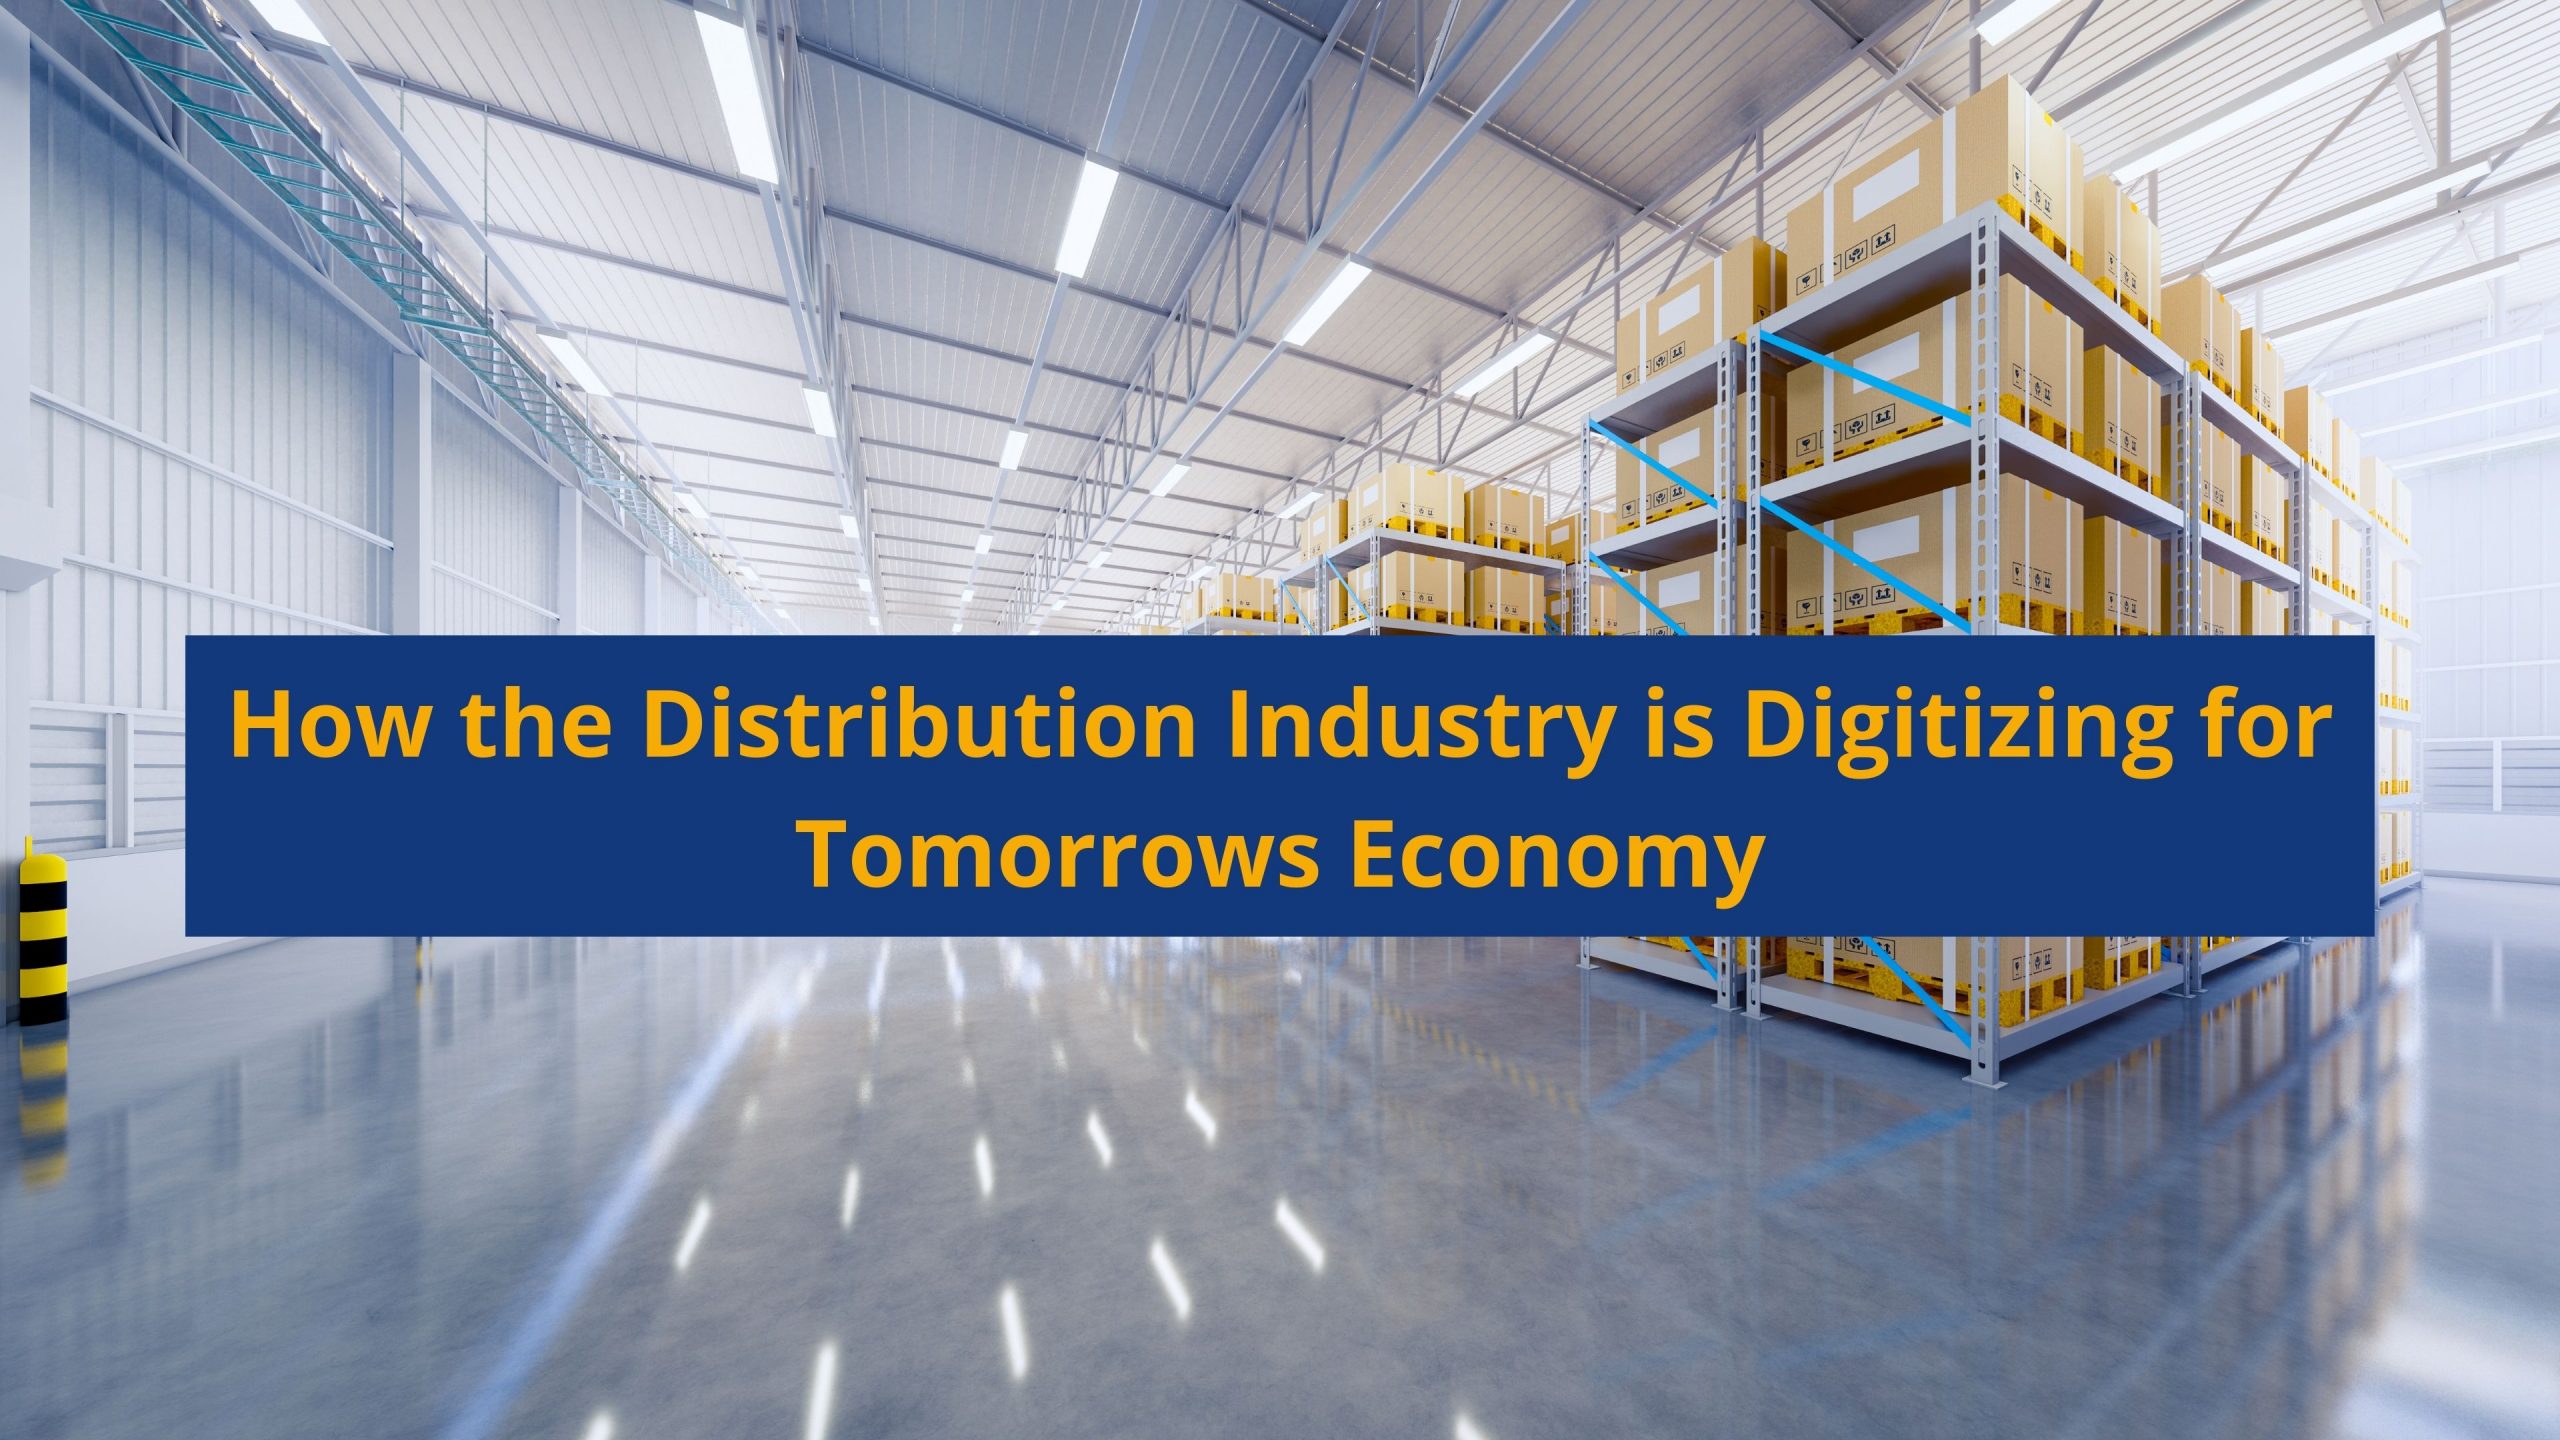 How the Distribution Industry is Digitizing for Tomorrows Economy